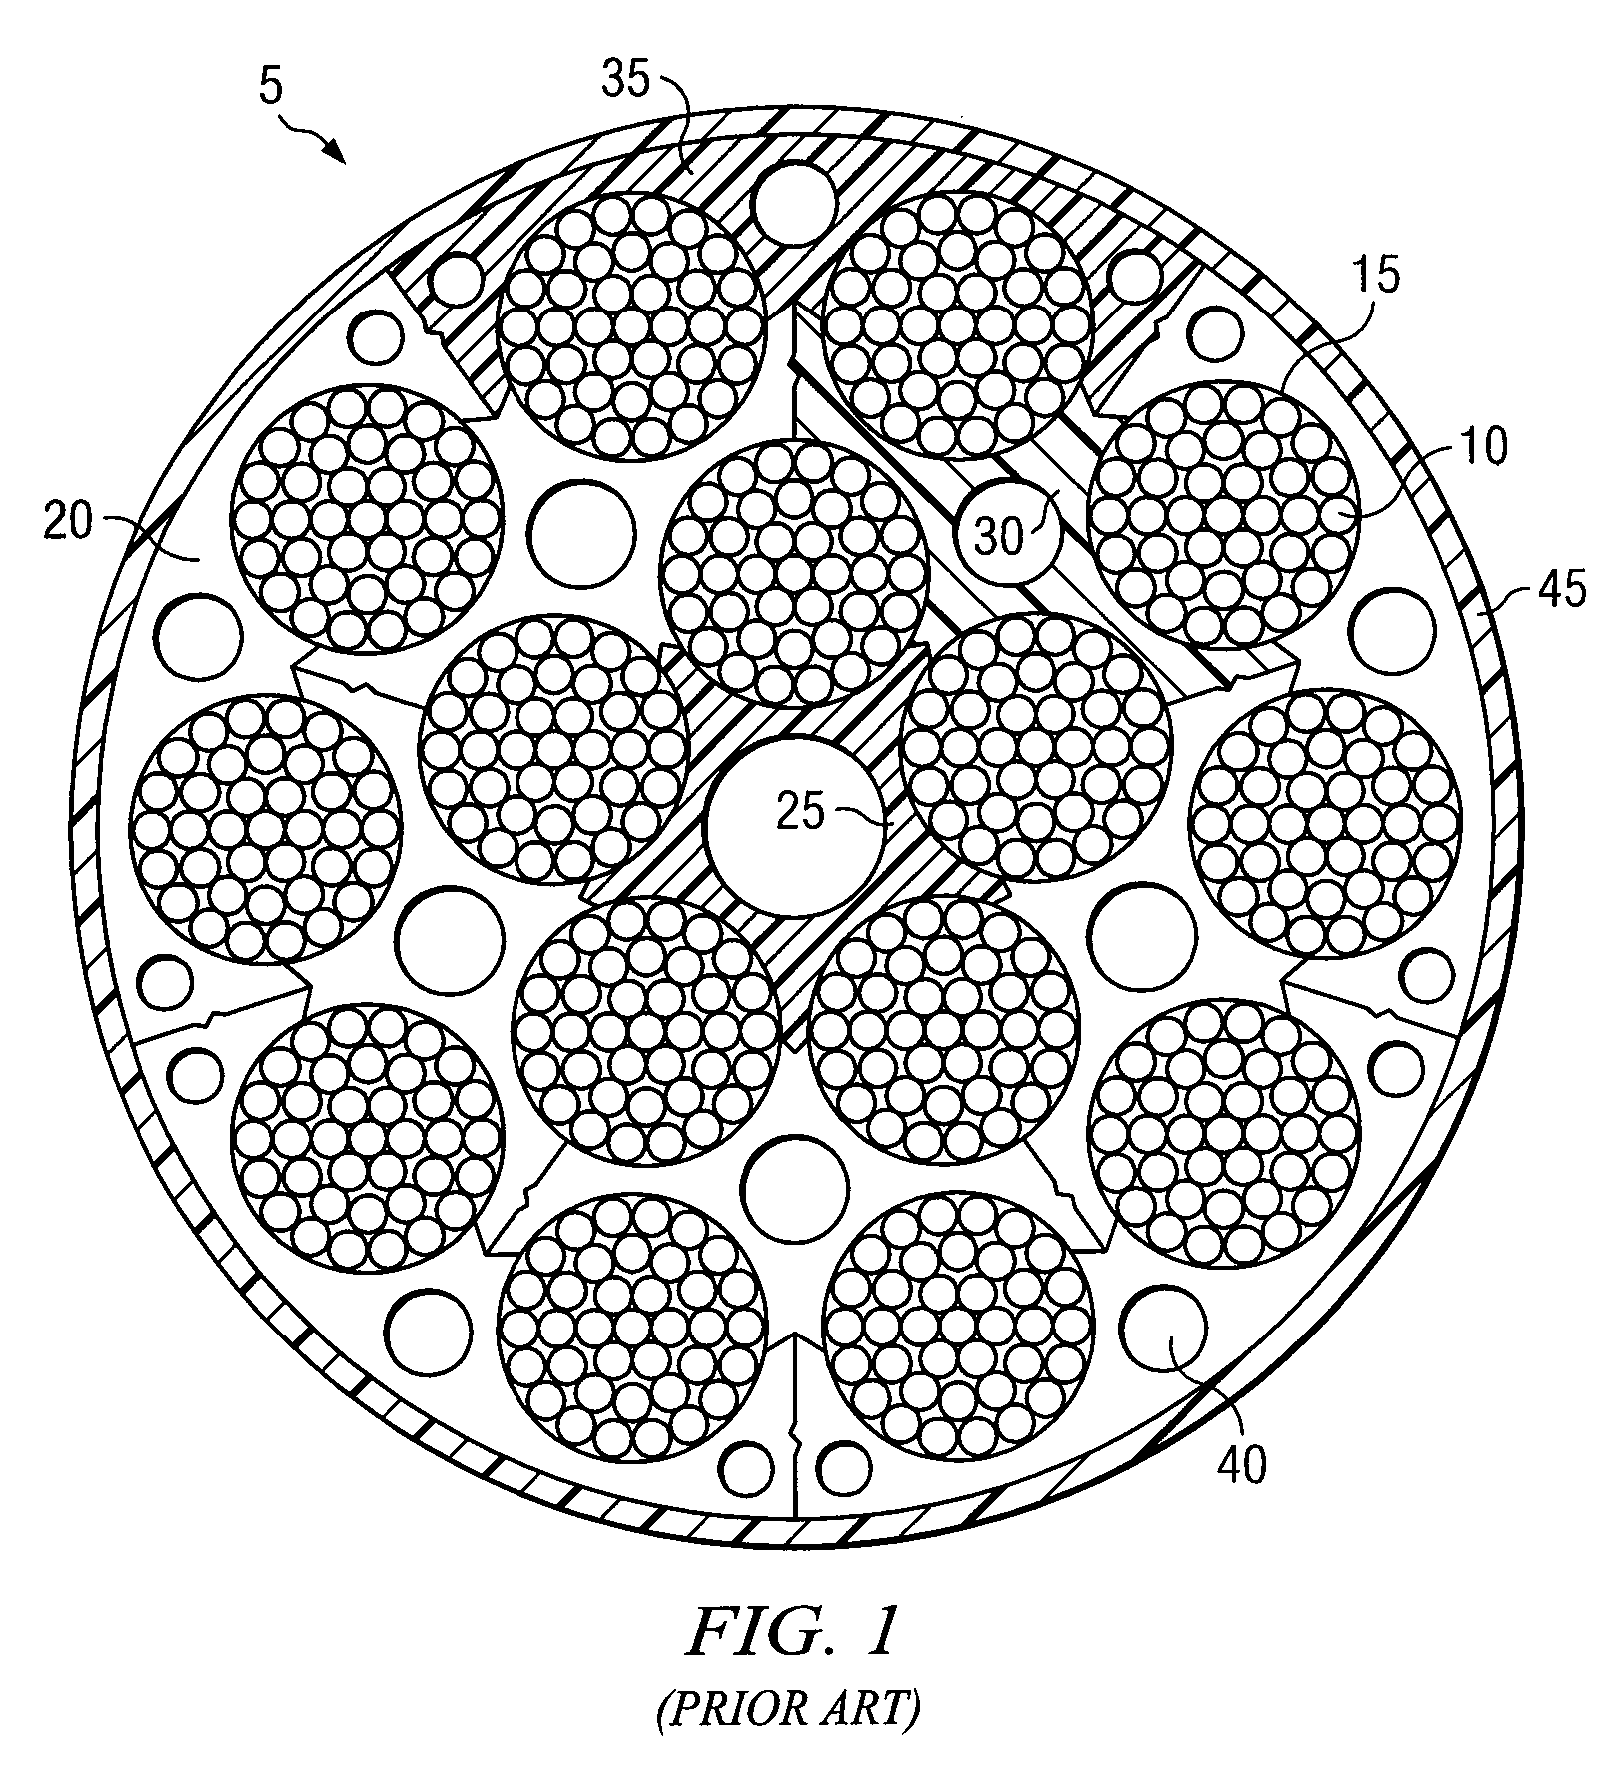 Composite tether and methods for manufacturing, transporting, and installing same